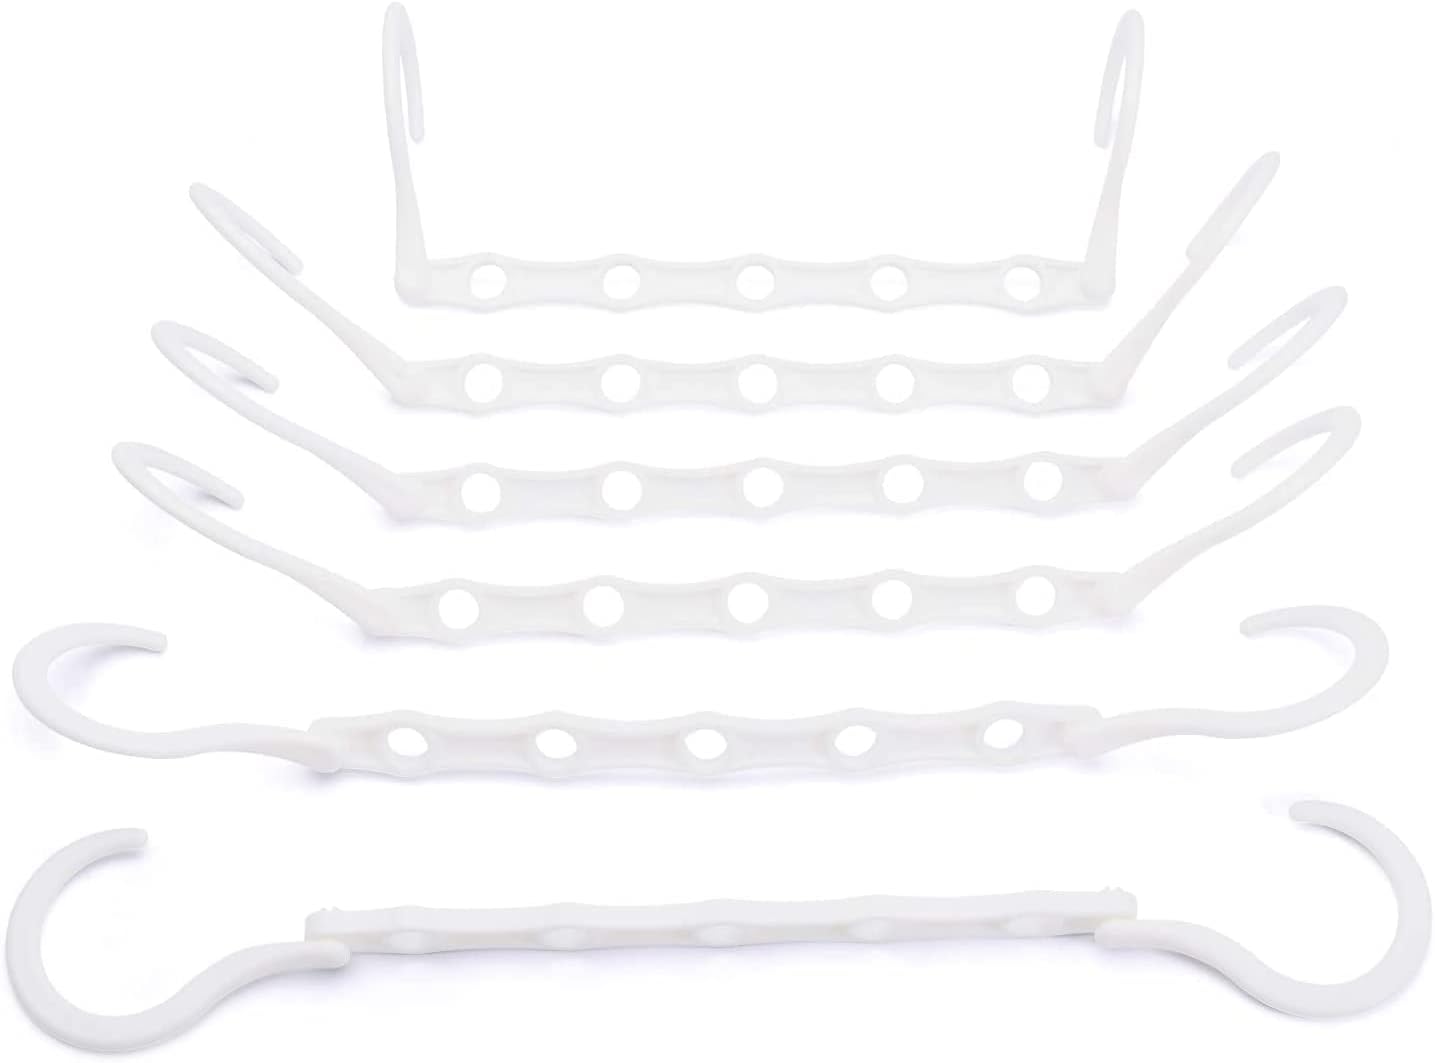 HOUSE DAY 15 Inch Plastic Hangers Space Saving Organizers White